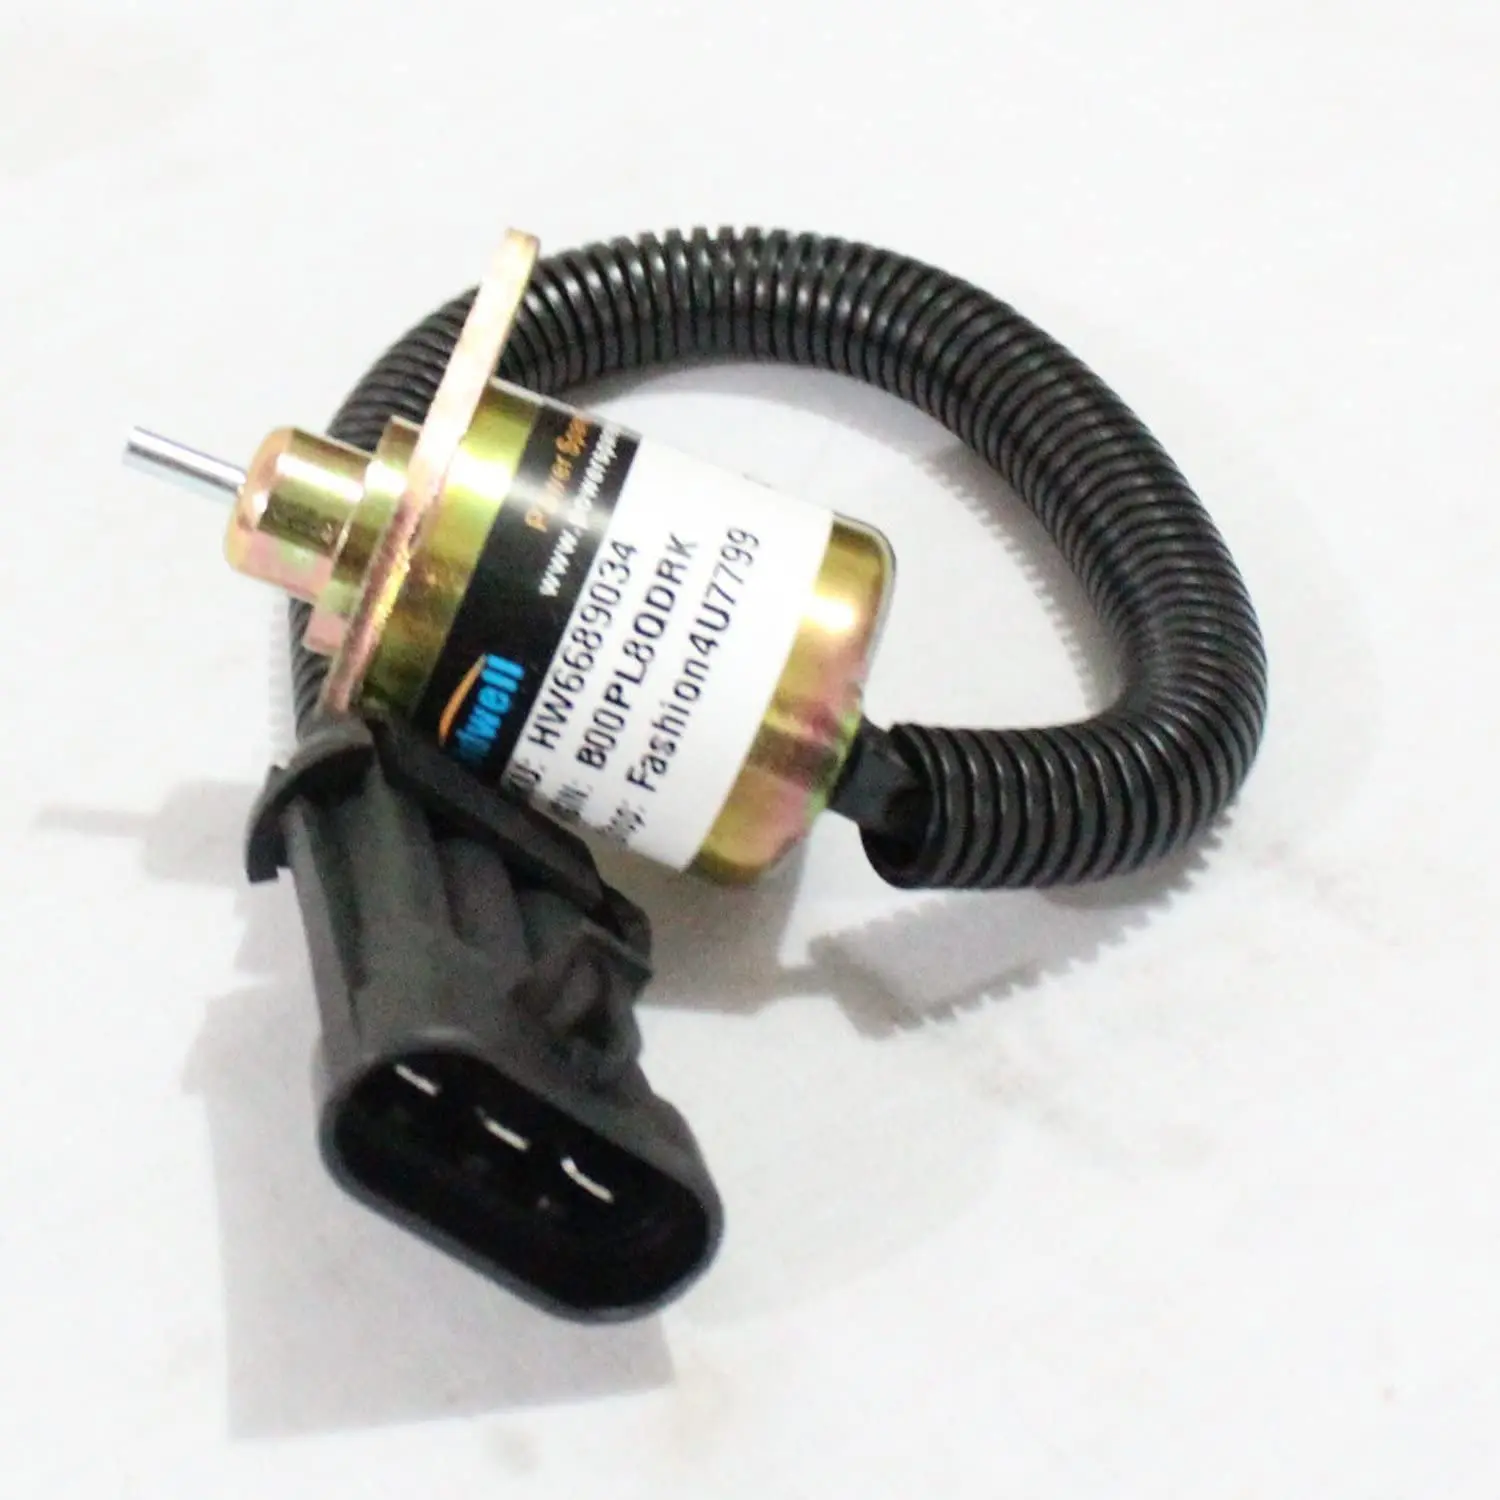 

Holdwell Fuel Solenoid for Bobcat T2250 A300 A770 S220 S250 S300 S750 S770 S850 T250 T300 T320 T750 T770 T870